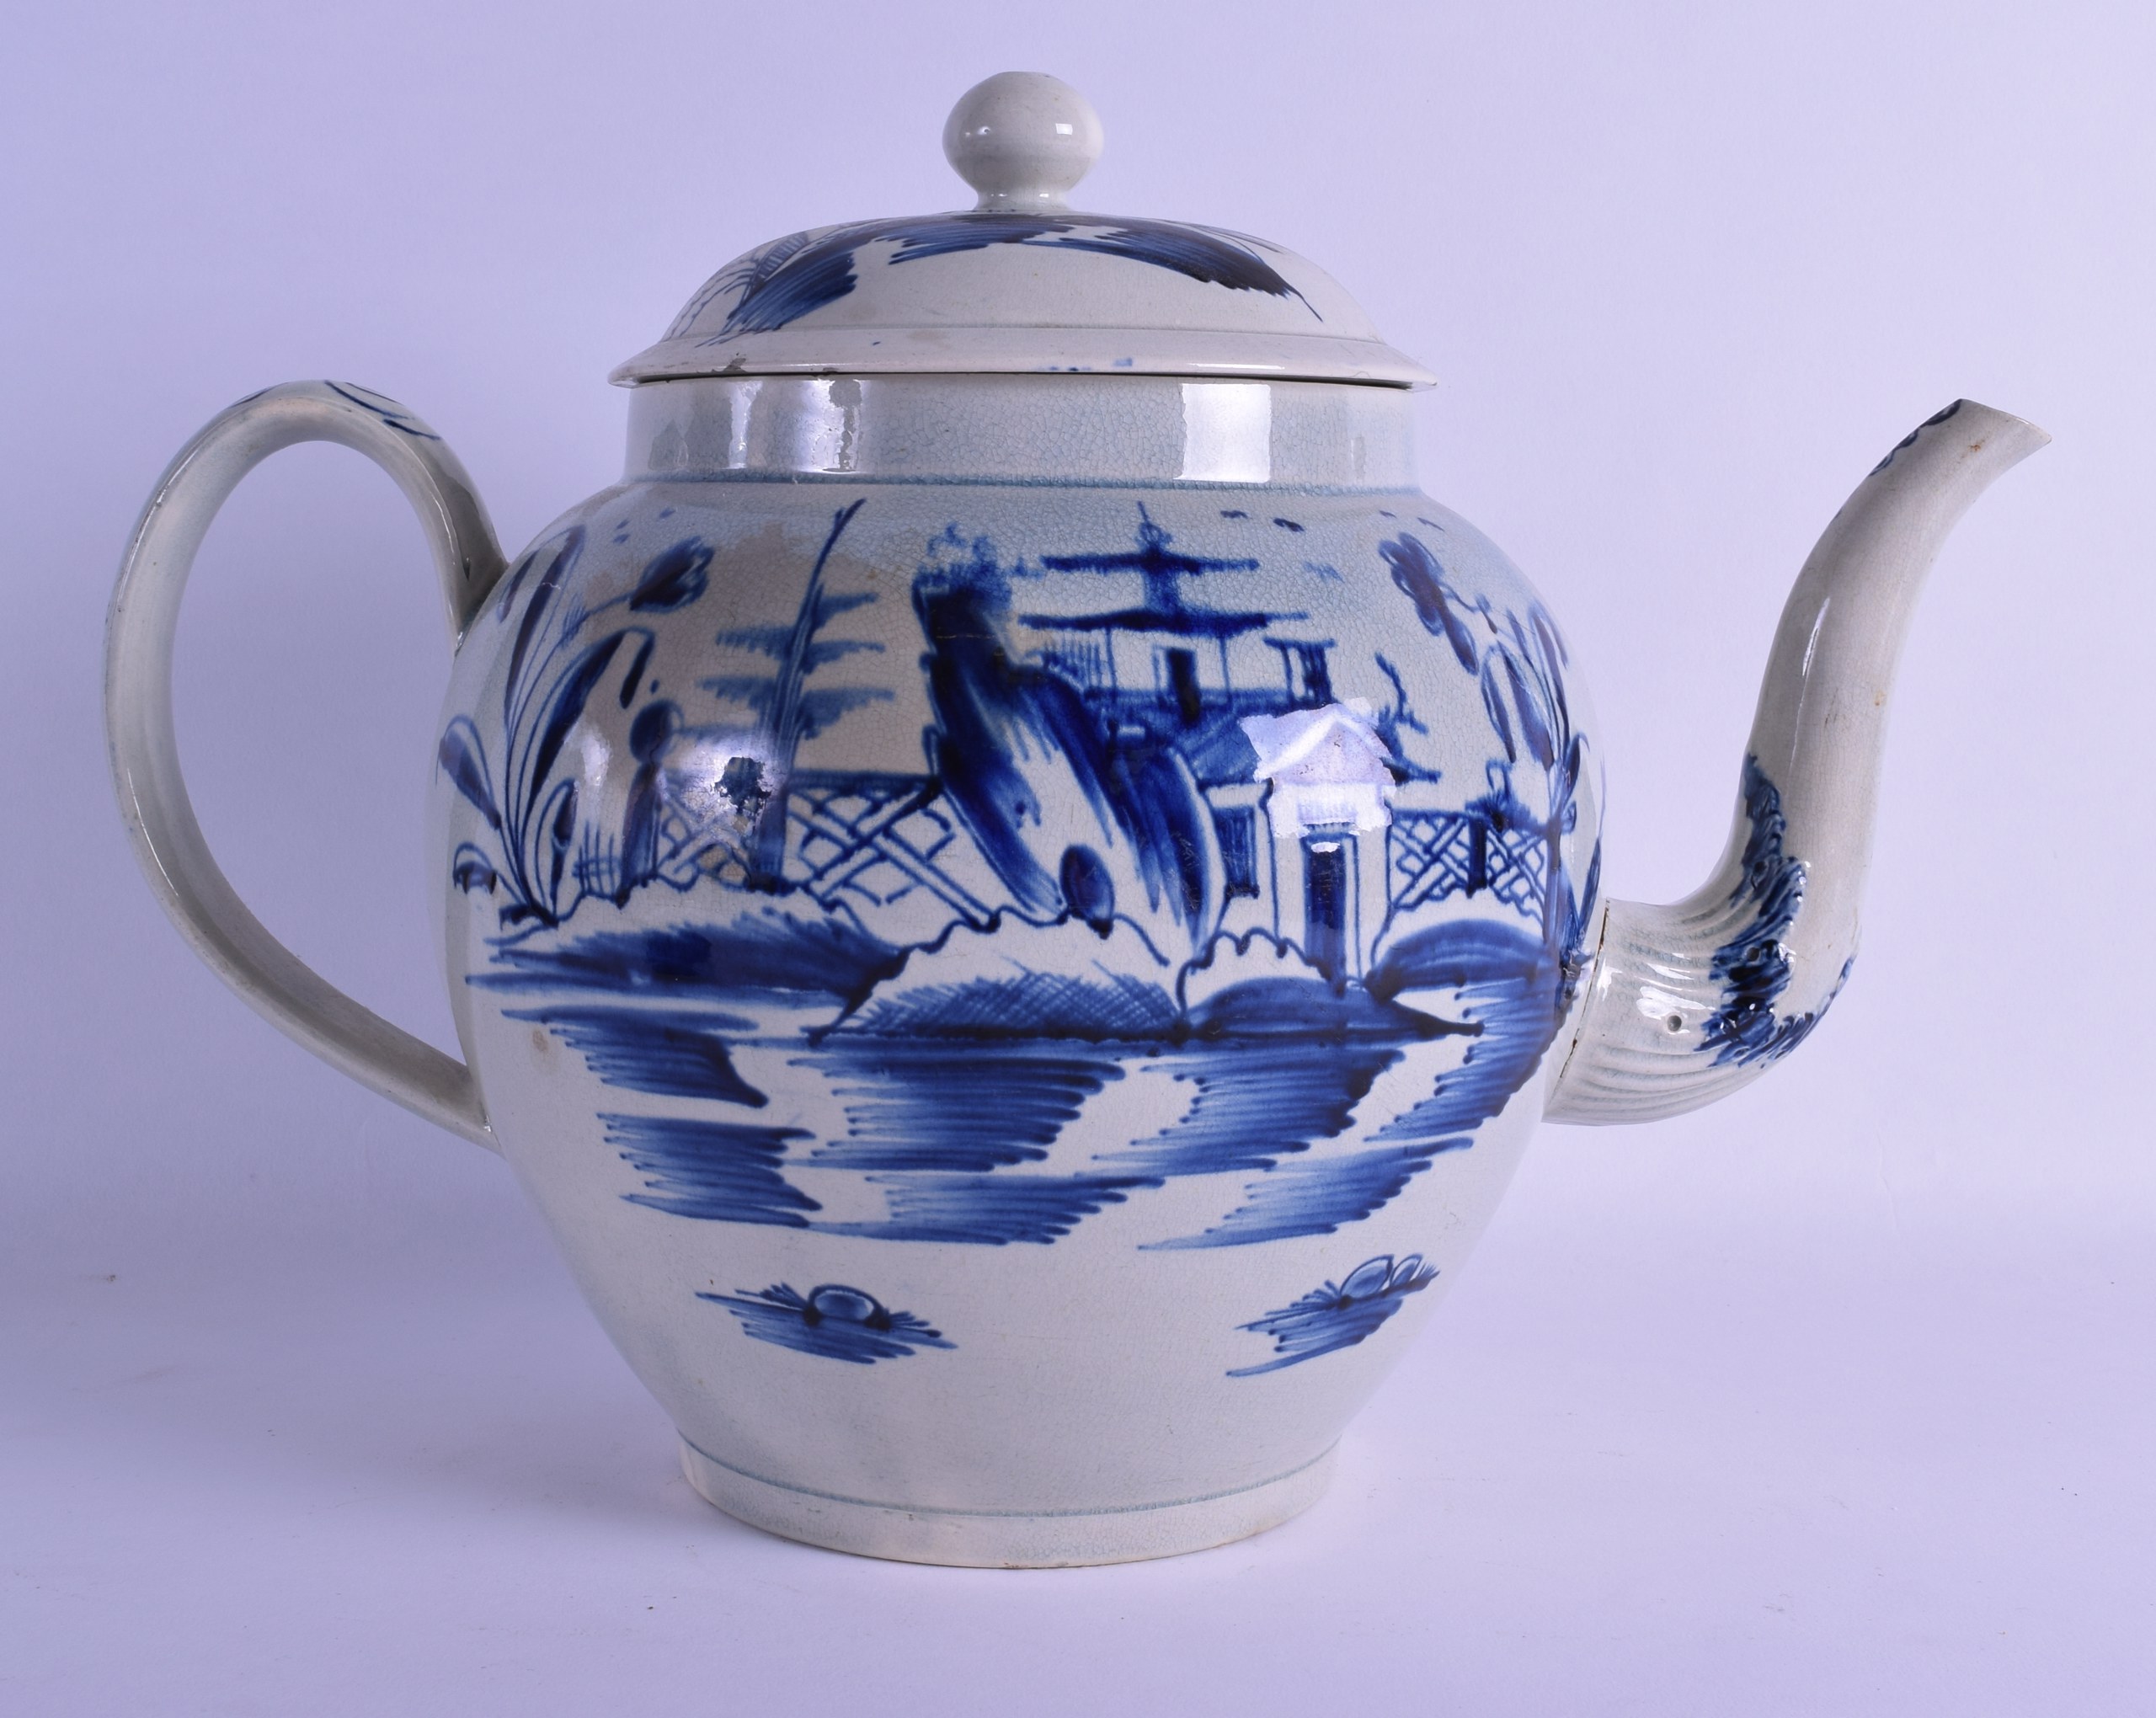 A LARGE EARLY 19TH CENTURY ENGLISH PEARLWARE PUNCH POT AND COVER painted with a house within a